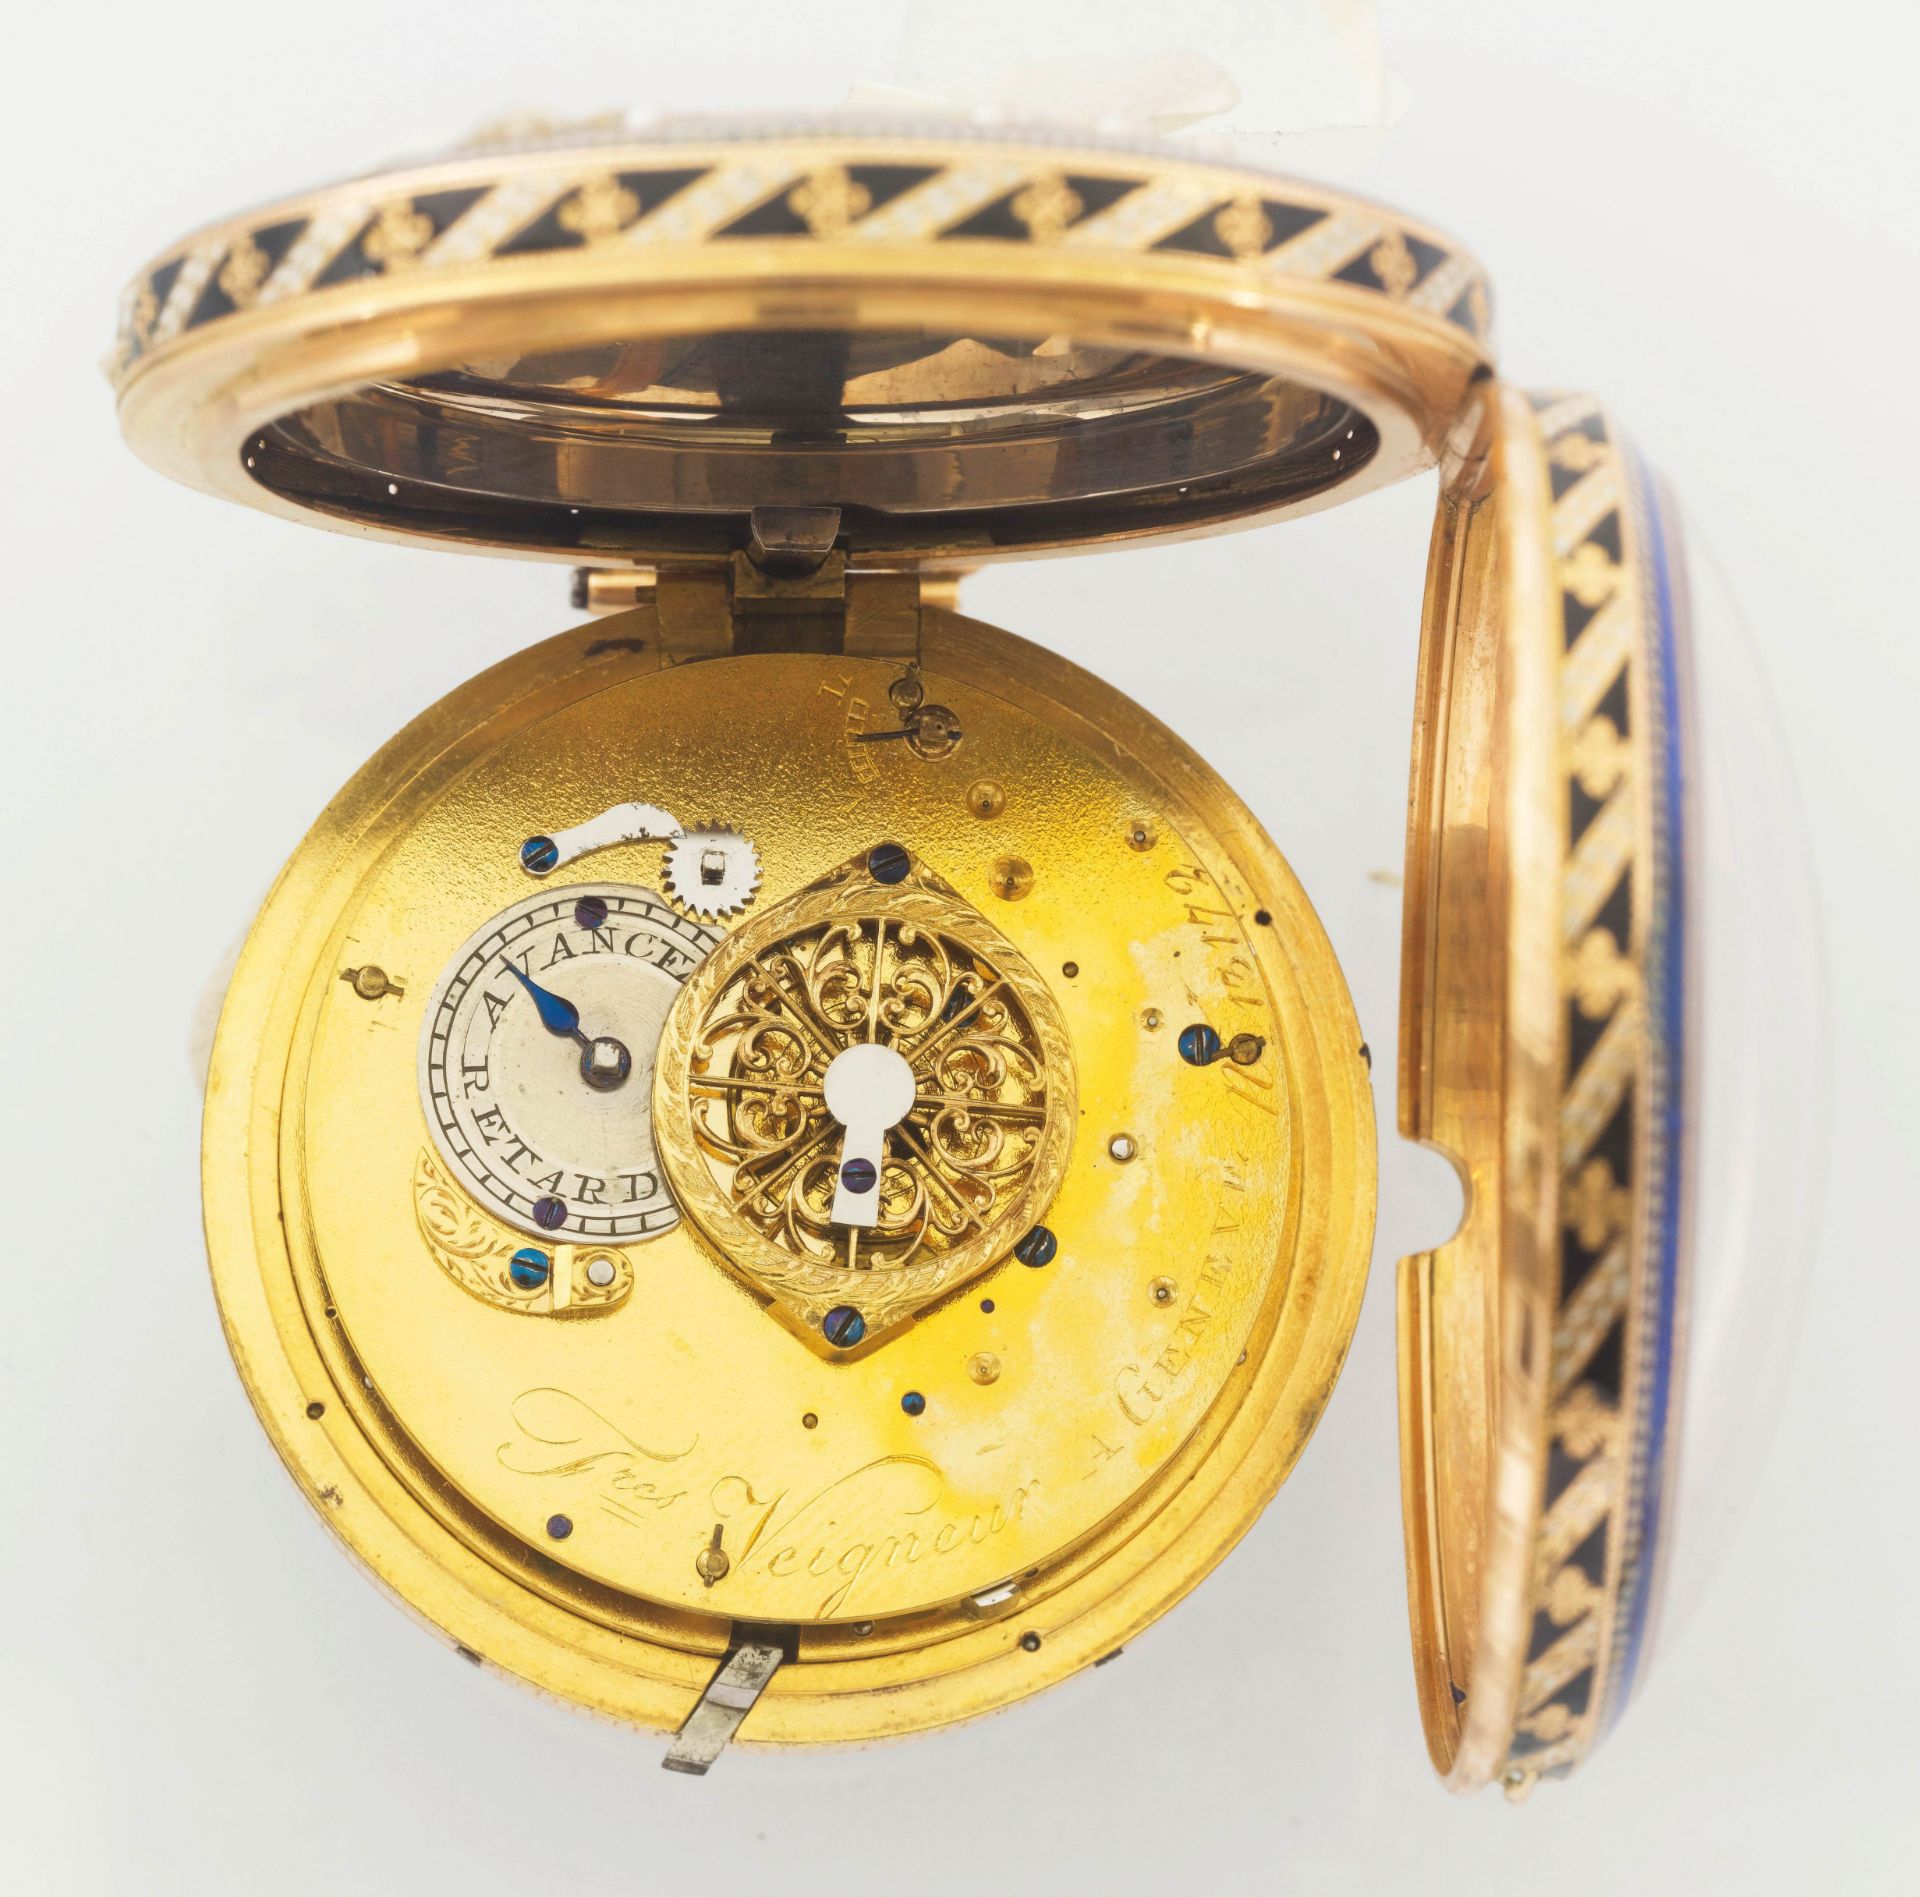 Veigneur Frères, extremely rare and large gold enamel pocket watch with 1/4-repeater and automation, - Image 3 of 4